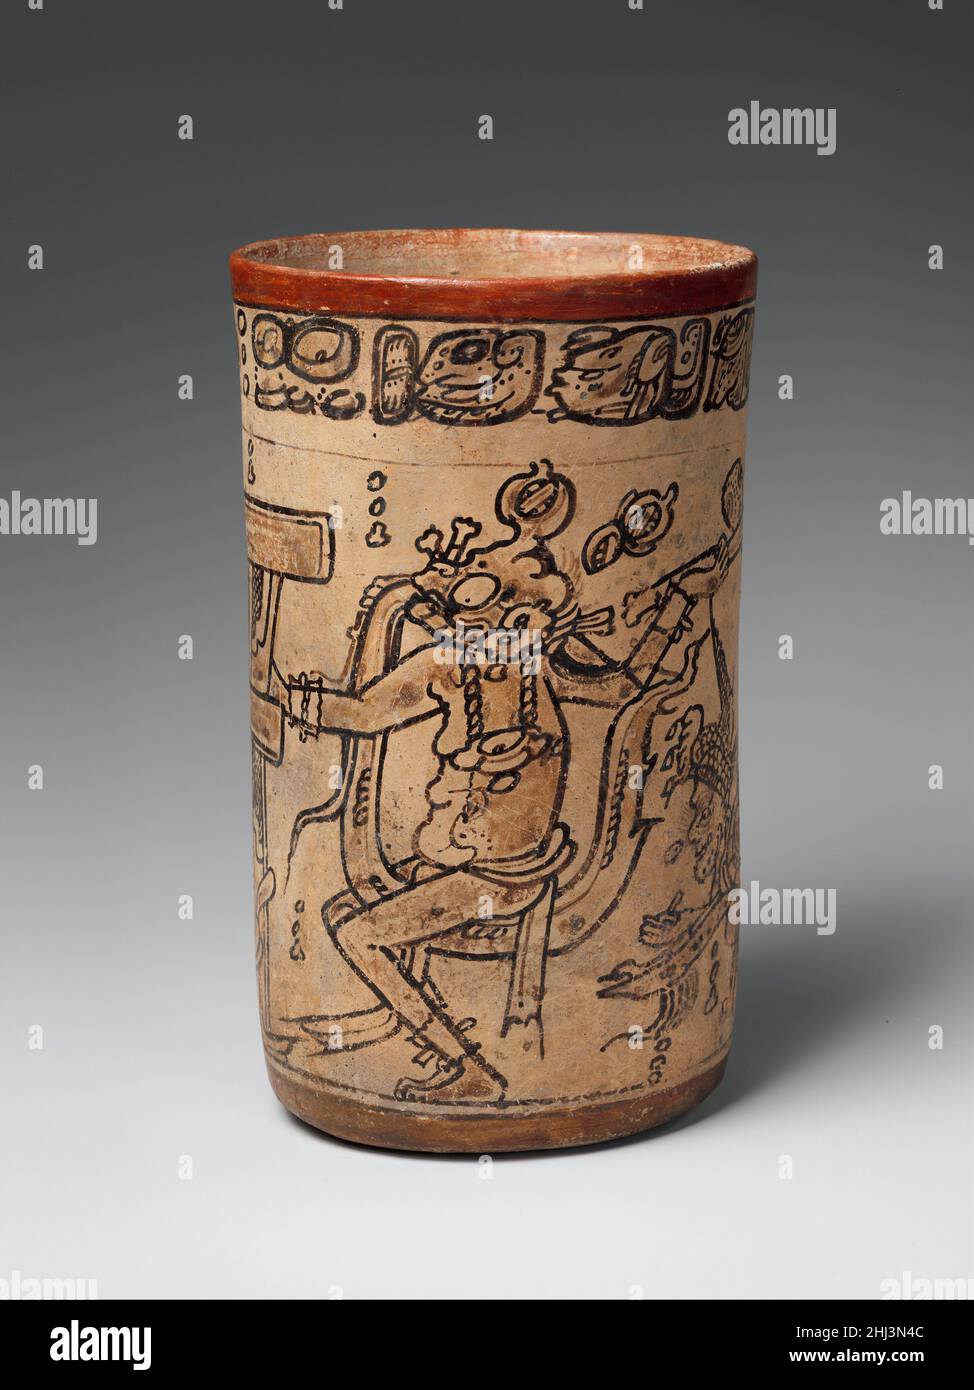 Codex-Style Vase with Mythological Scene ca. 7th or 8th century Maya This drinking cup, painted in what is known as the codex style, shows a unique scene from the corpus of Maya ceramic paintings. The protagonist is an aging Rain God, known by the name Chahk in the hieroglyphic script, who wields a ceremonial ax in his left hand while placing his right hand on a stone temple or palace that he has presumably split open. The “grape-bunch” motif located to the right of the cleft on the temple’s facade signifies that the building is made of stone, and four half-quatrefoil motifs marked with crossh Stock Photo